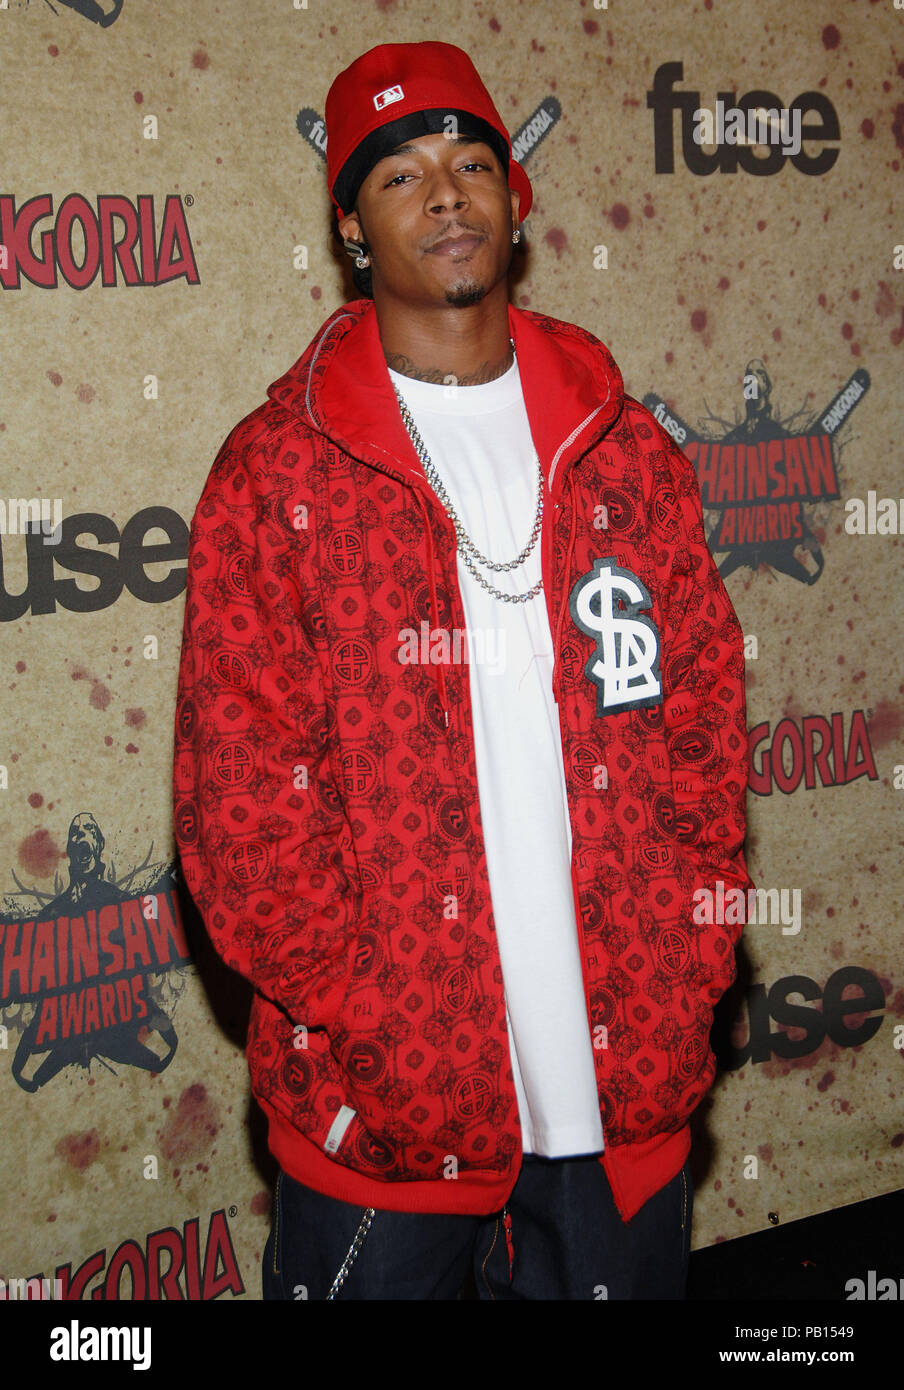 Chingy at the CHAINSAW AWARDS at the Orpheum Theatre in Los Angeles.  October 15, 2006. headshot cap eye contact music03 Chingy018 Red Carpet  Event, Vertical, USA, Film Industry, Celebrities, Photography, Bestof, Arts